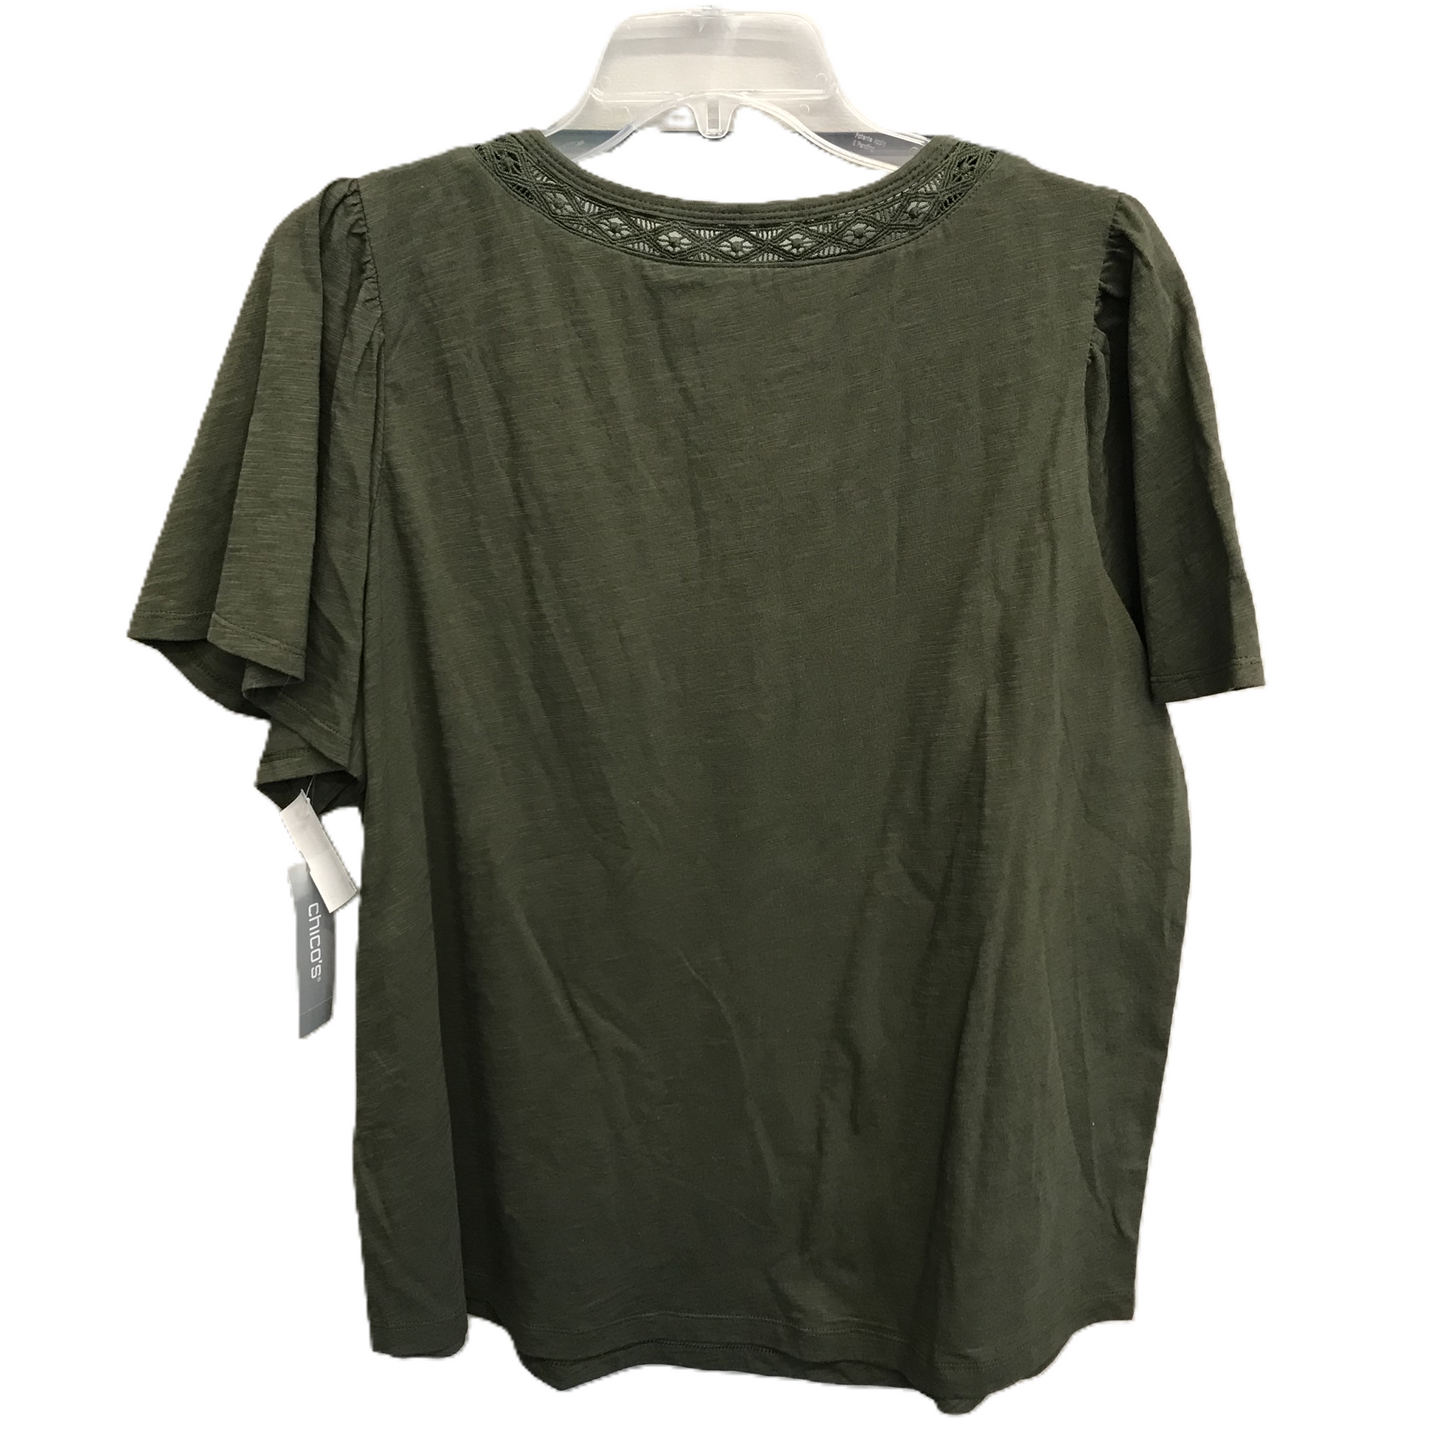 Green Top Short Sleeve Basic By Chicos, Size: L